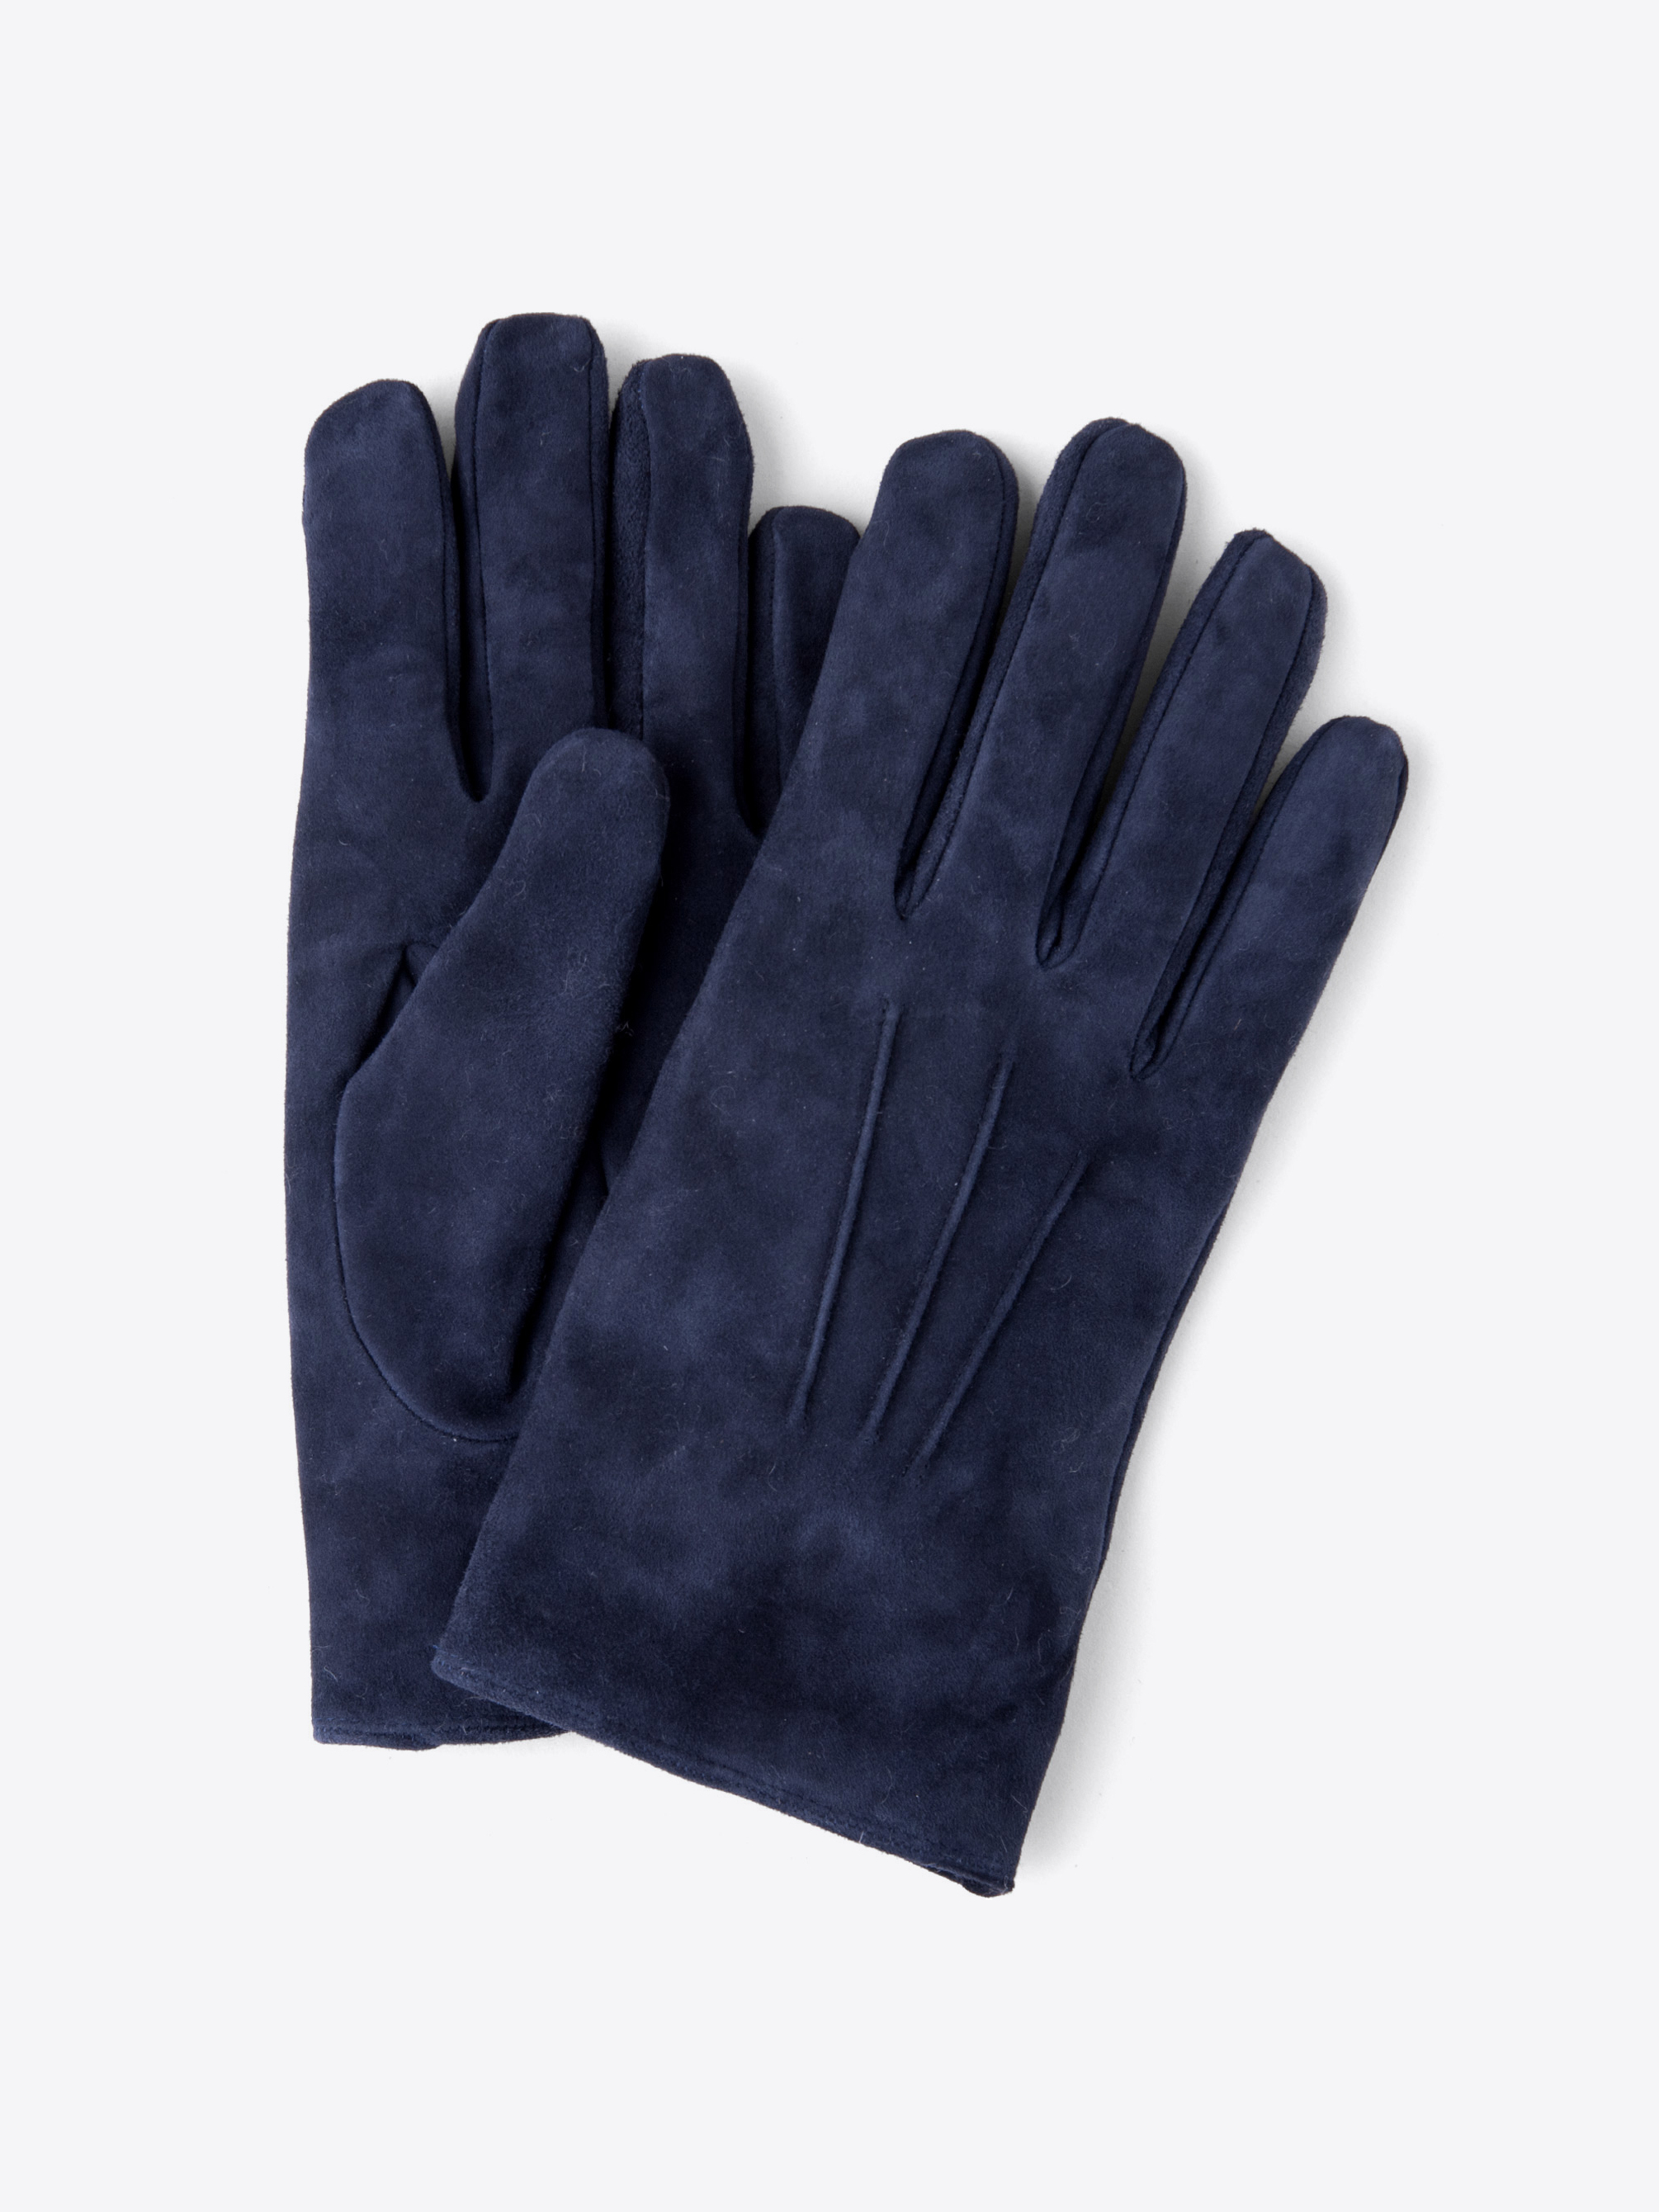 Zoom Image of Navy Suede Cashmere Lined Gloves